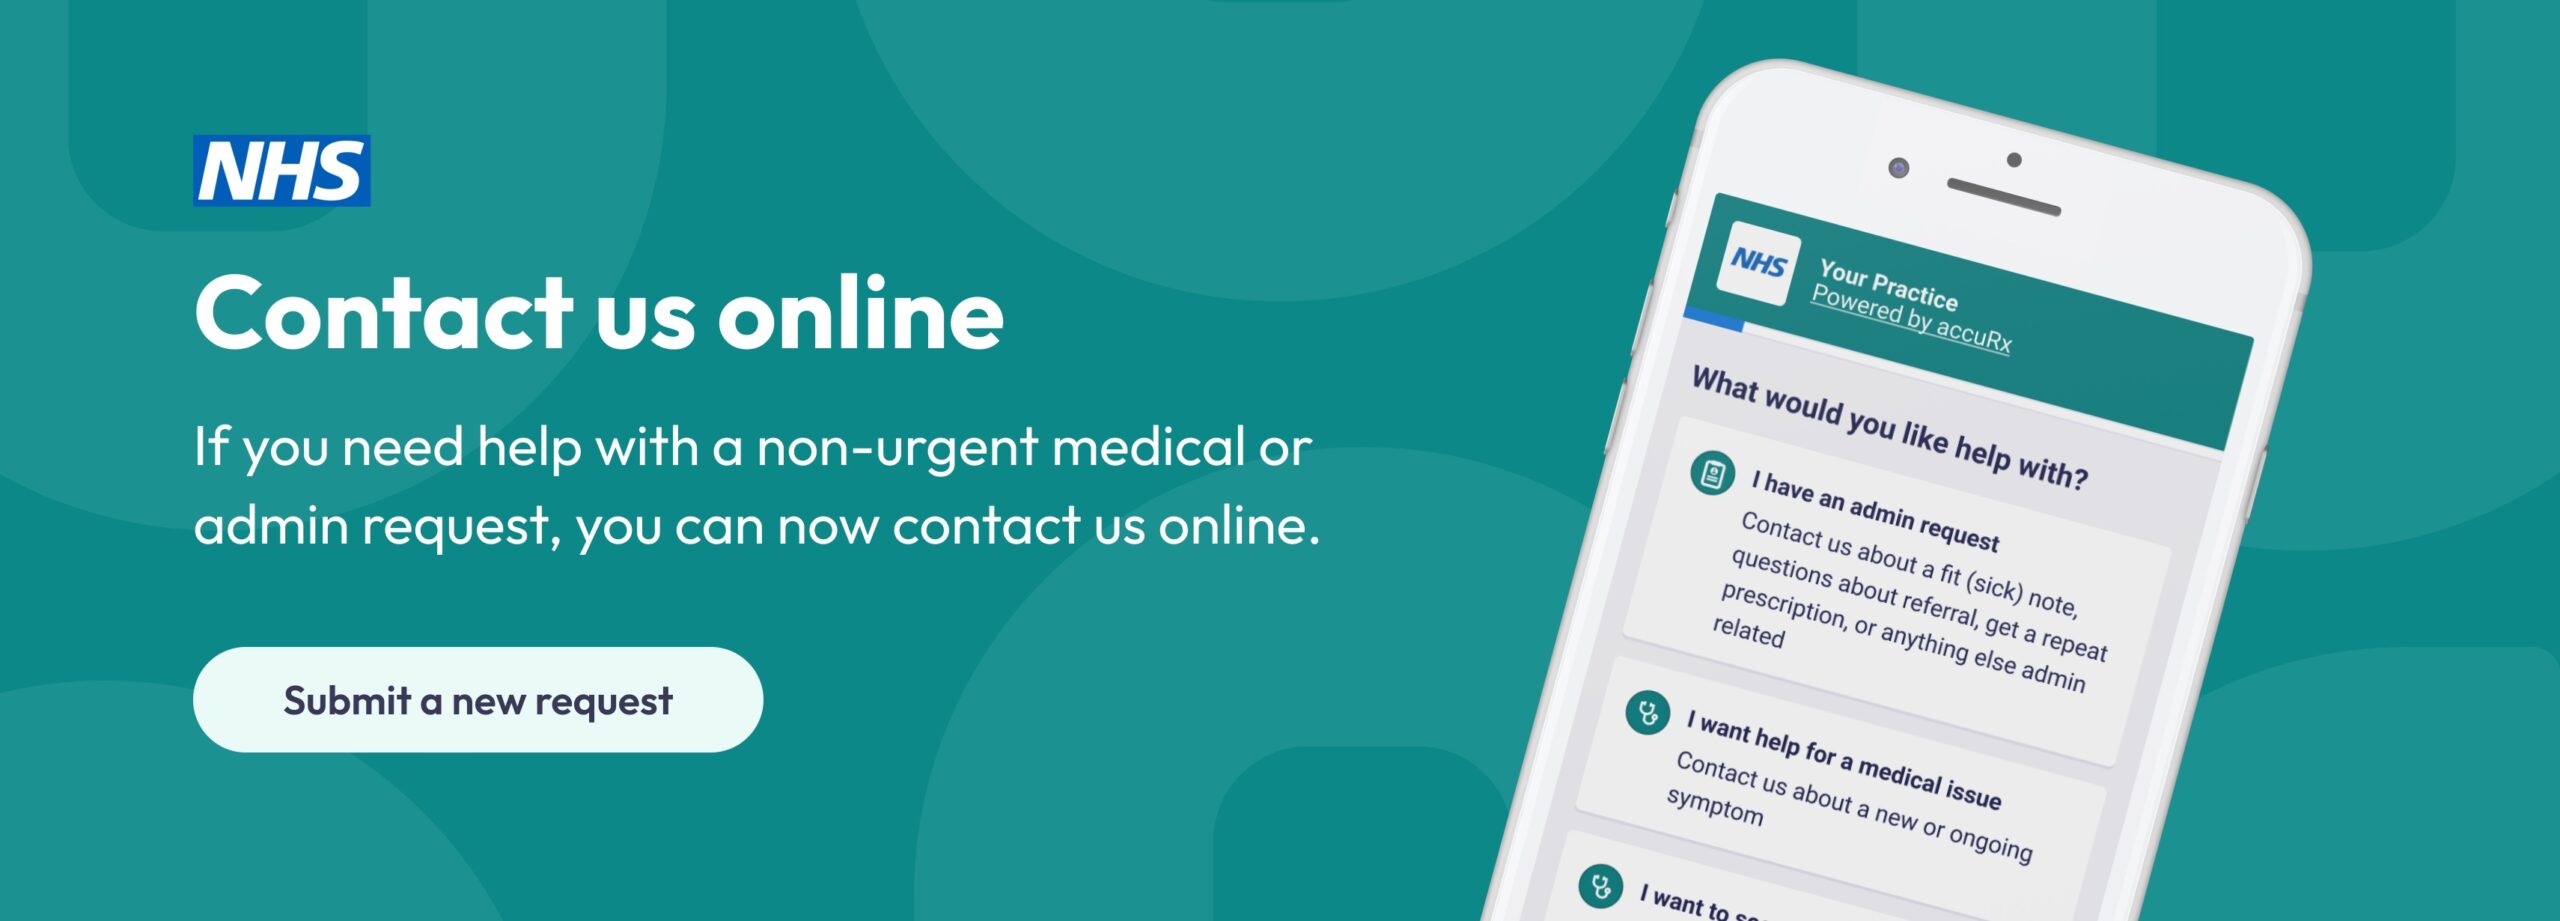 contact your gp online banner linked to accurx service